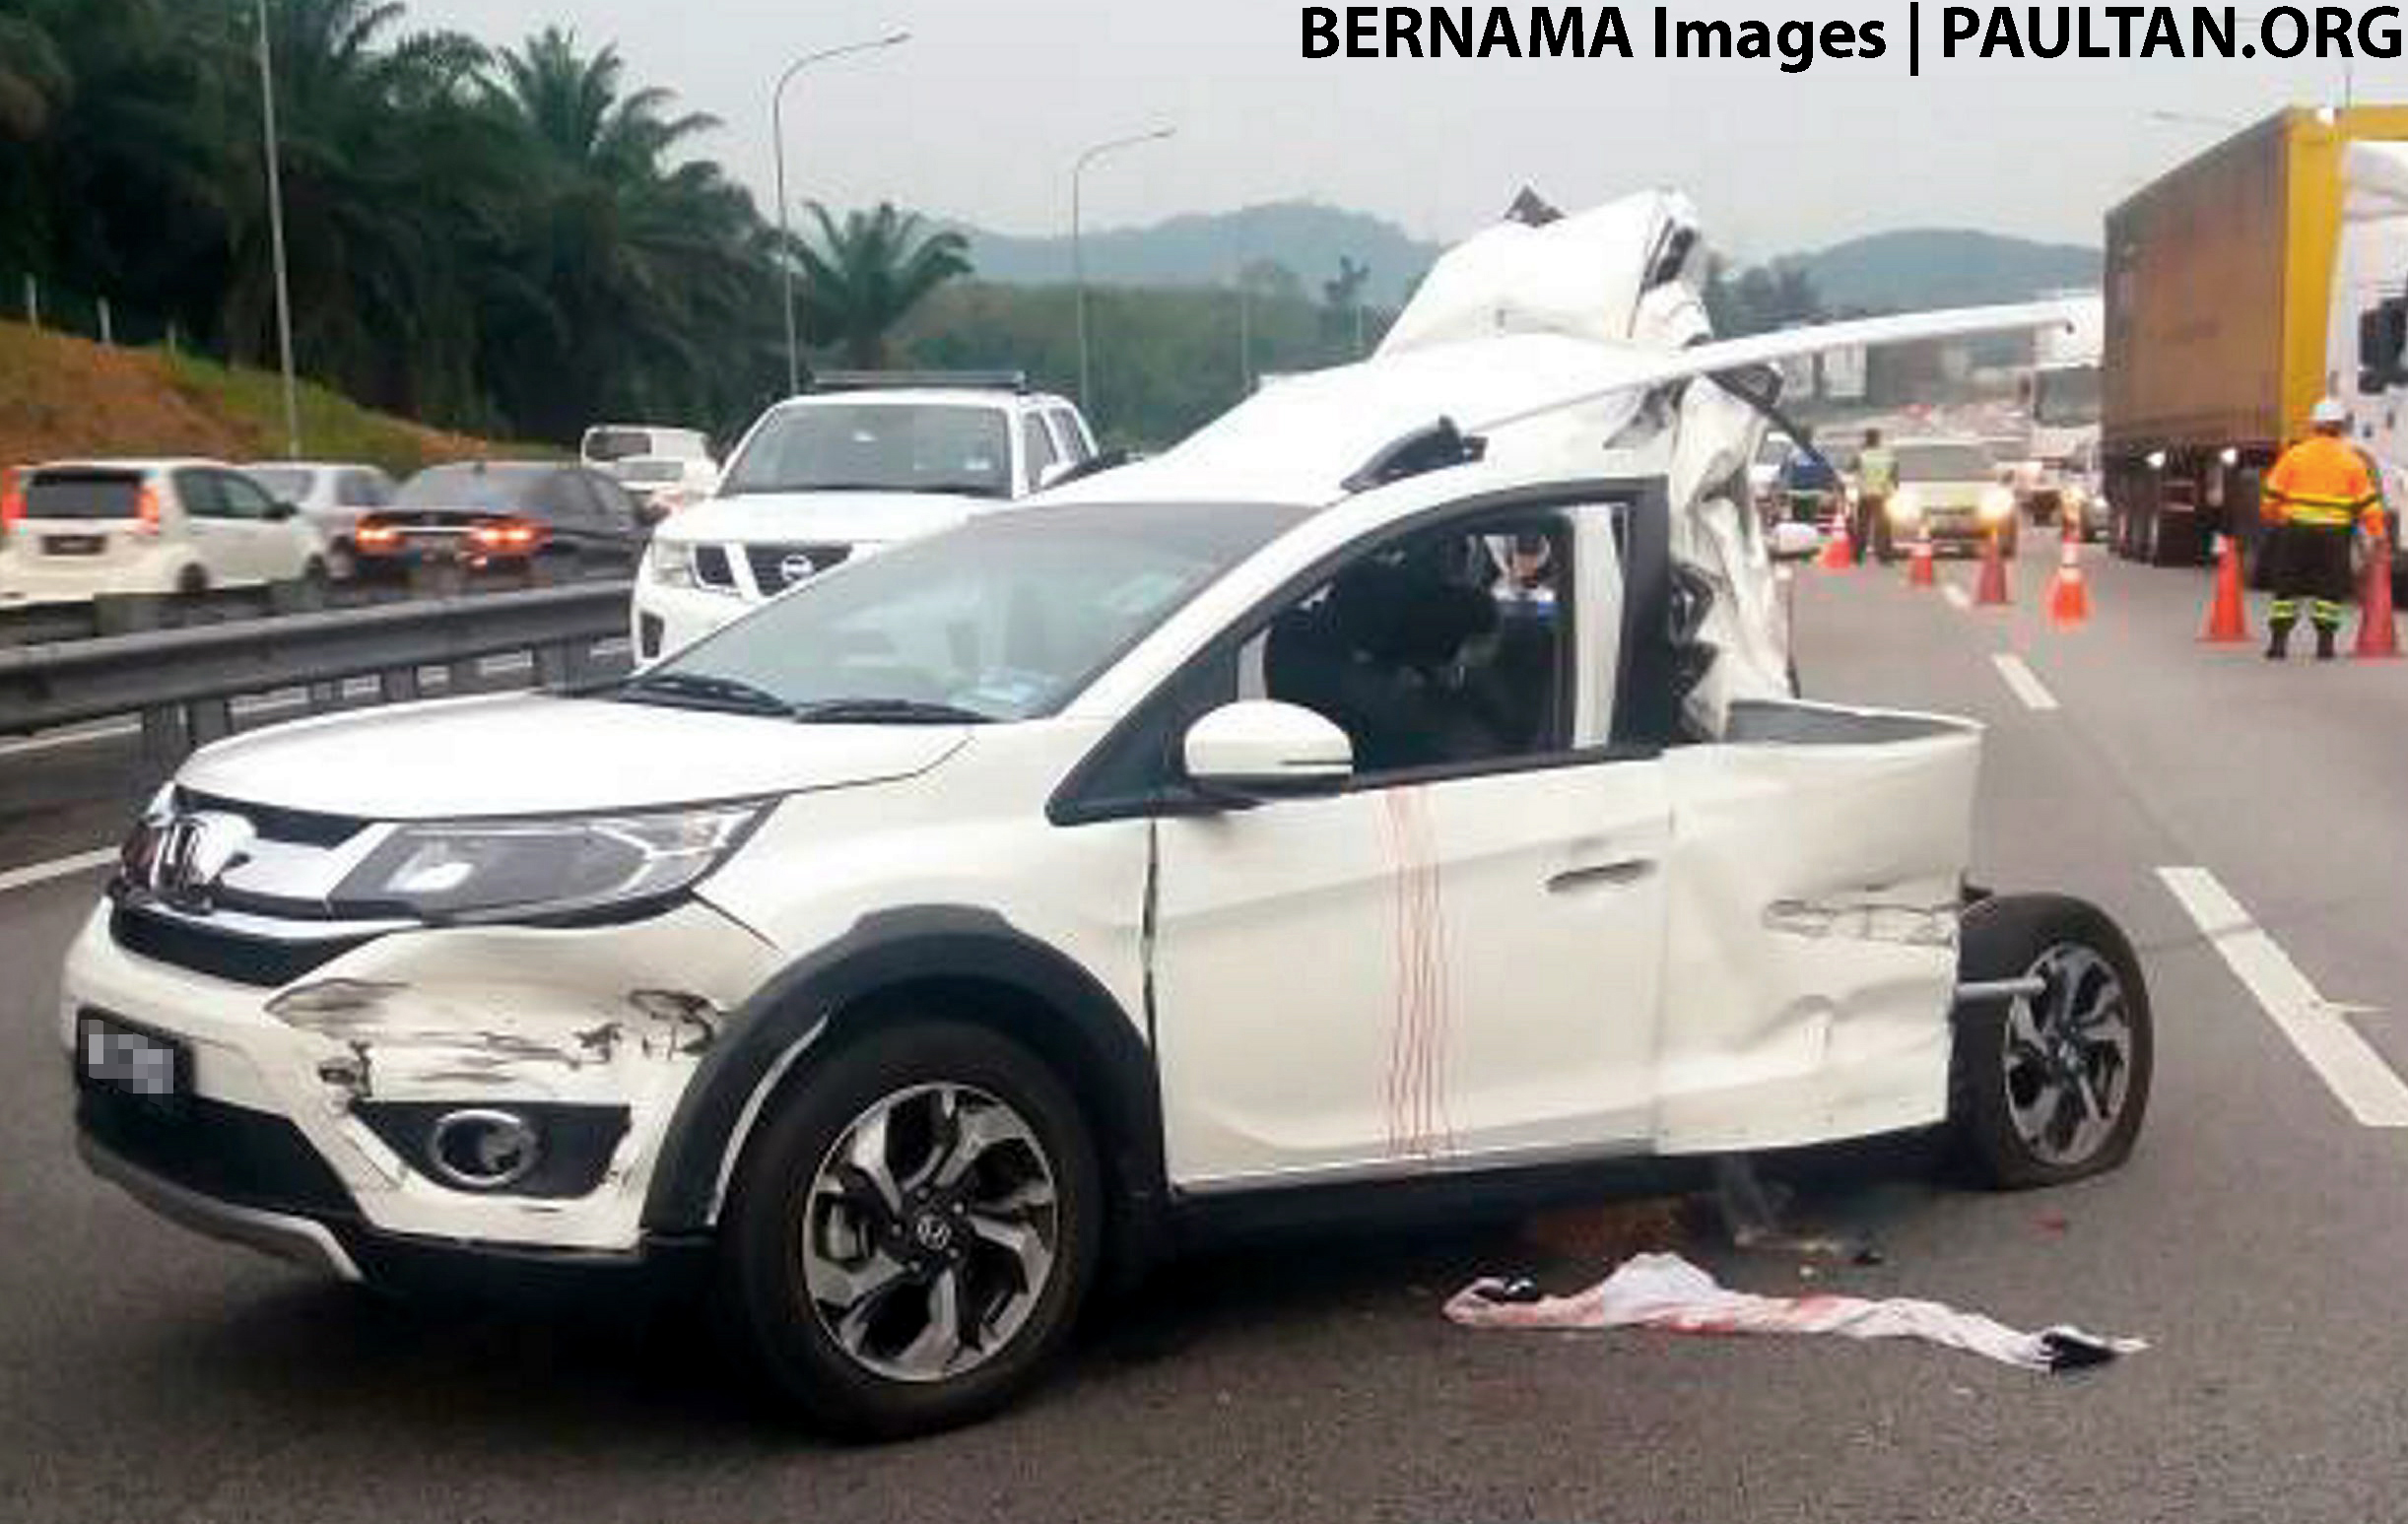 Yet another child dies in road accident in Malaysia ...